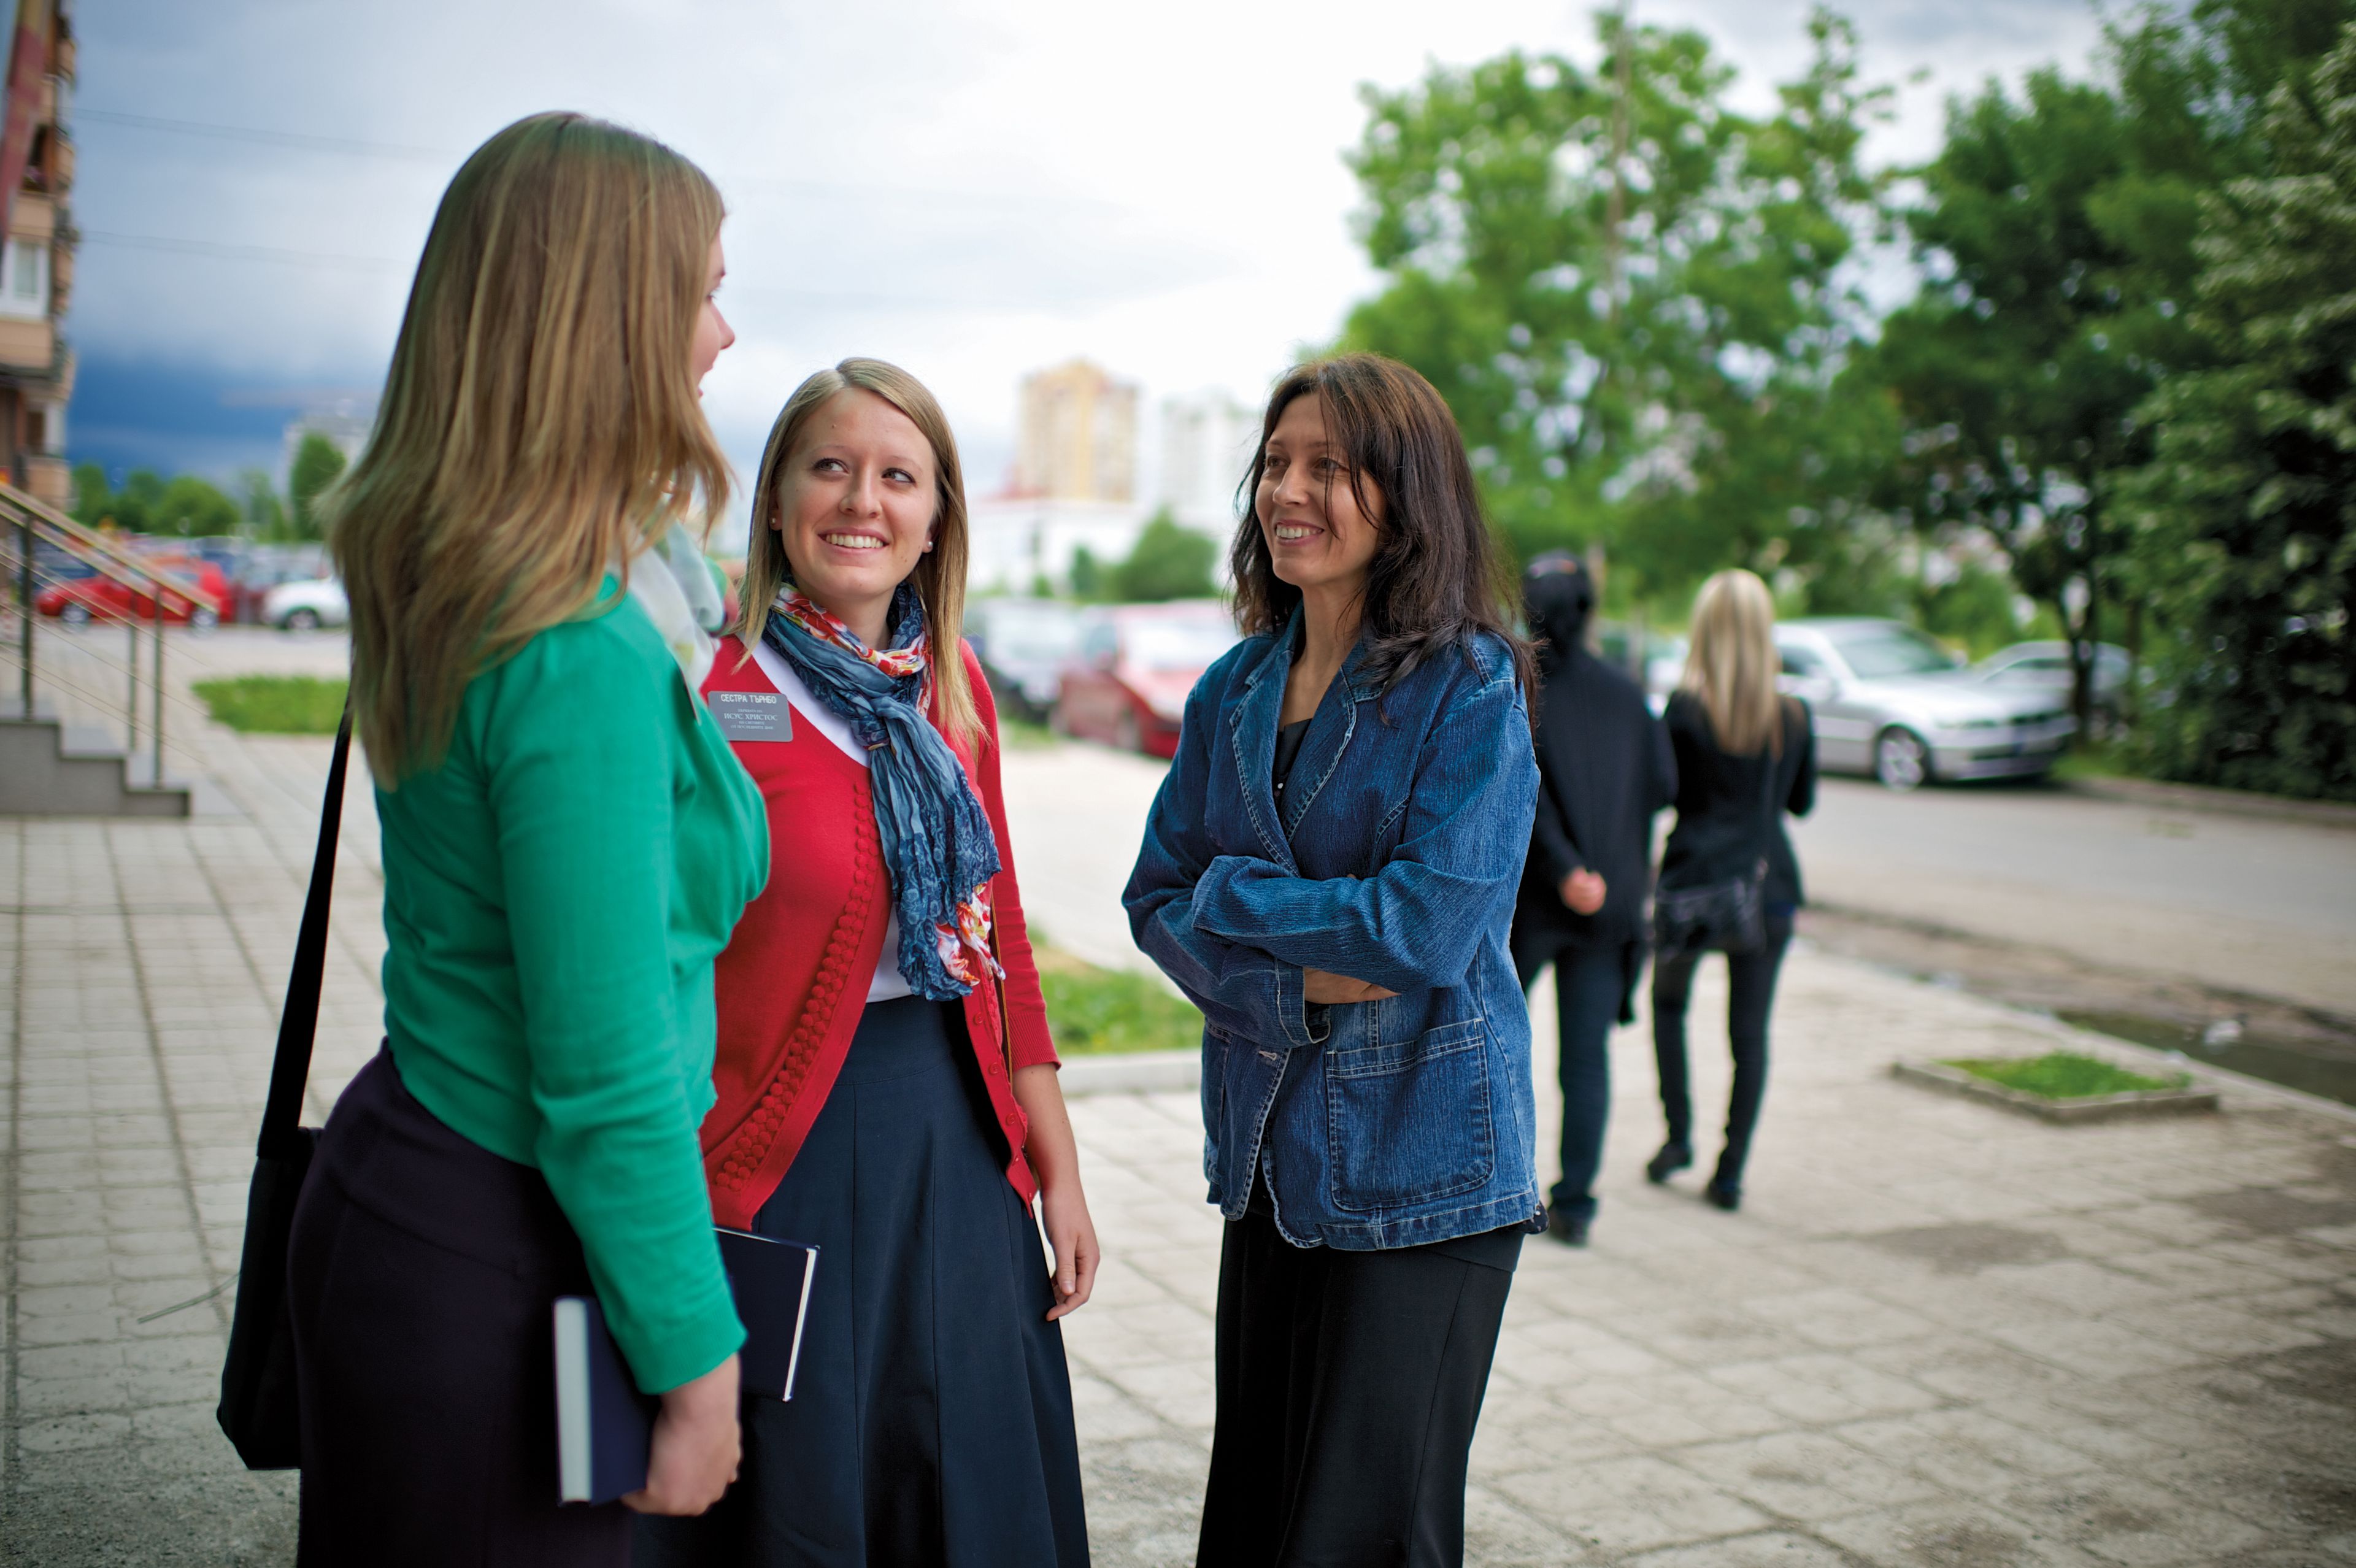 A woman talking to two sister missionaries on a sidewalk.